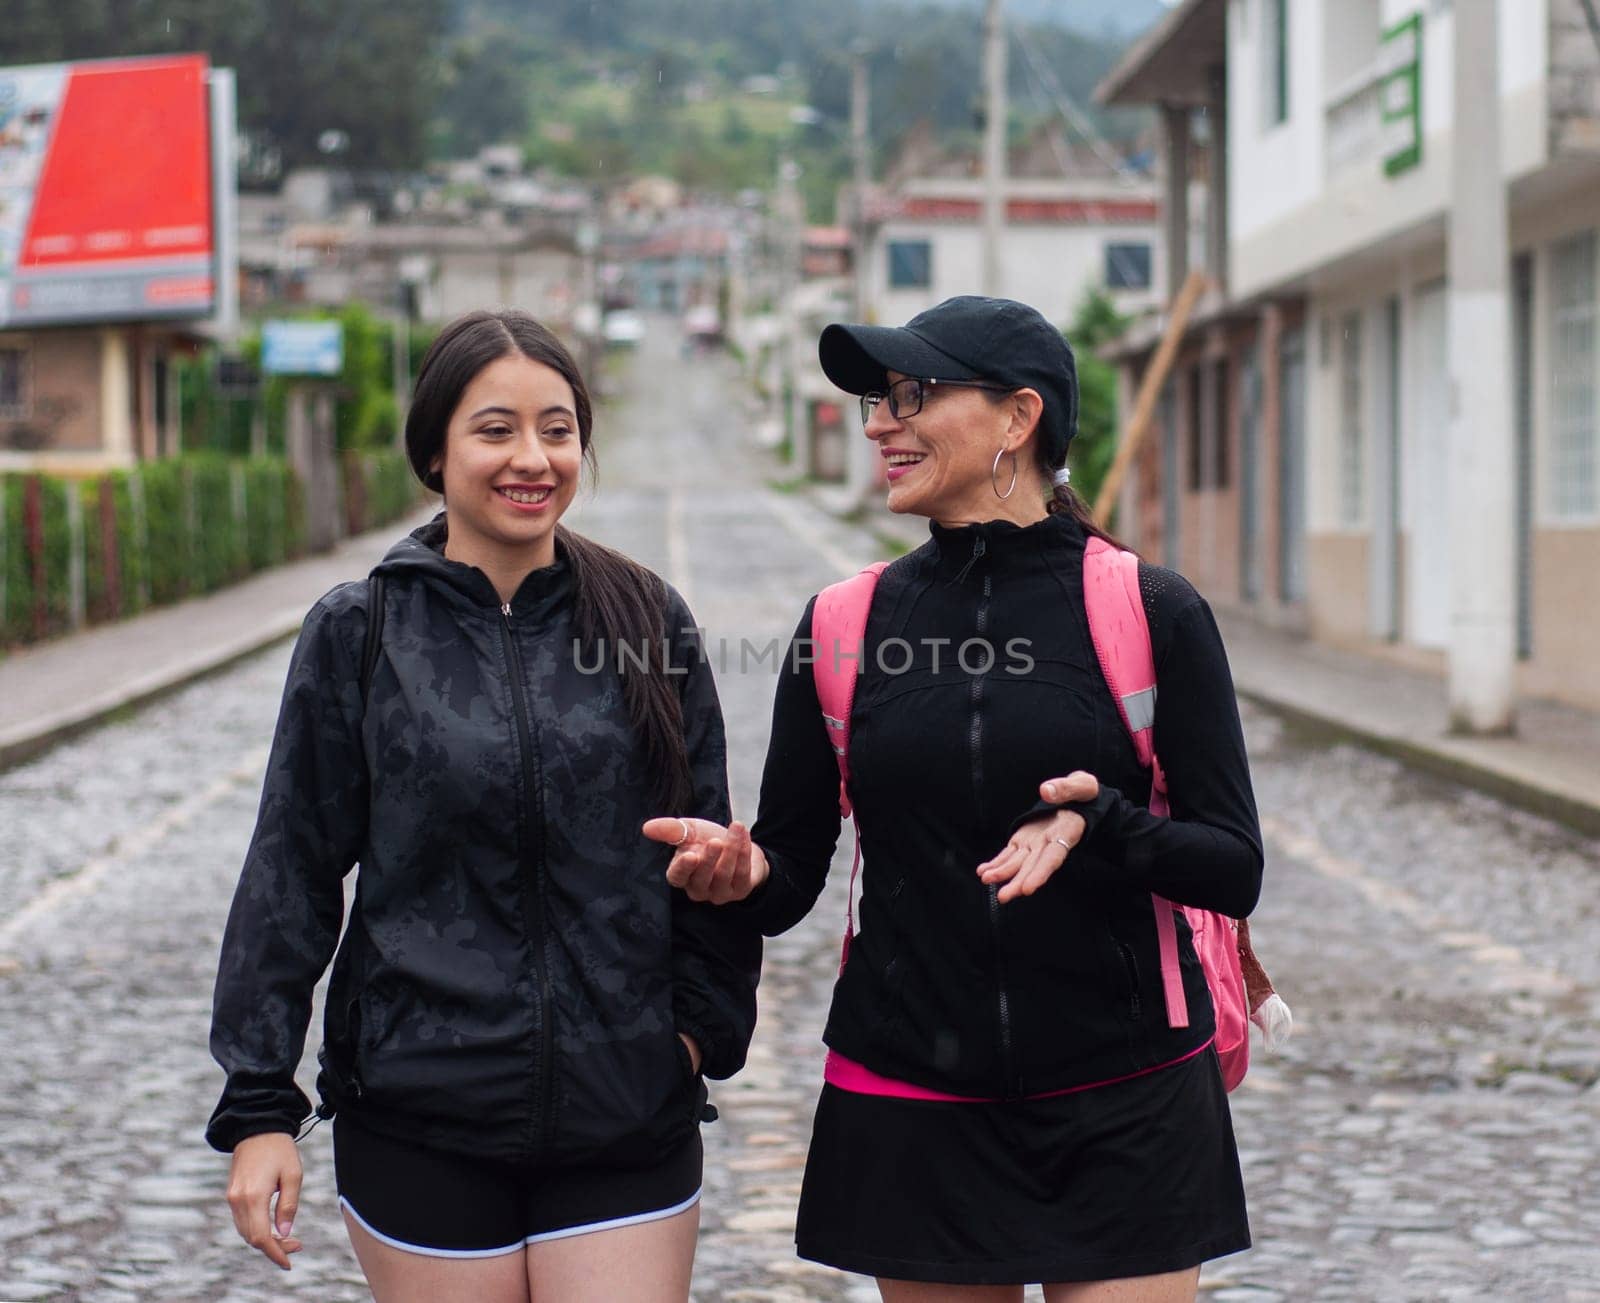 mother and daughter doing rural tourism in sportswear walking on a stone path in the city with two backpacks. backpackers' day by Raulmartin